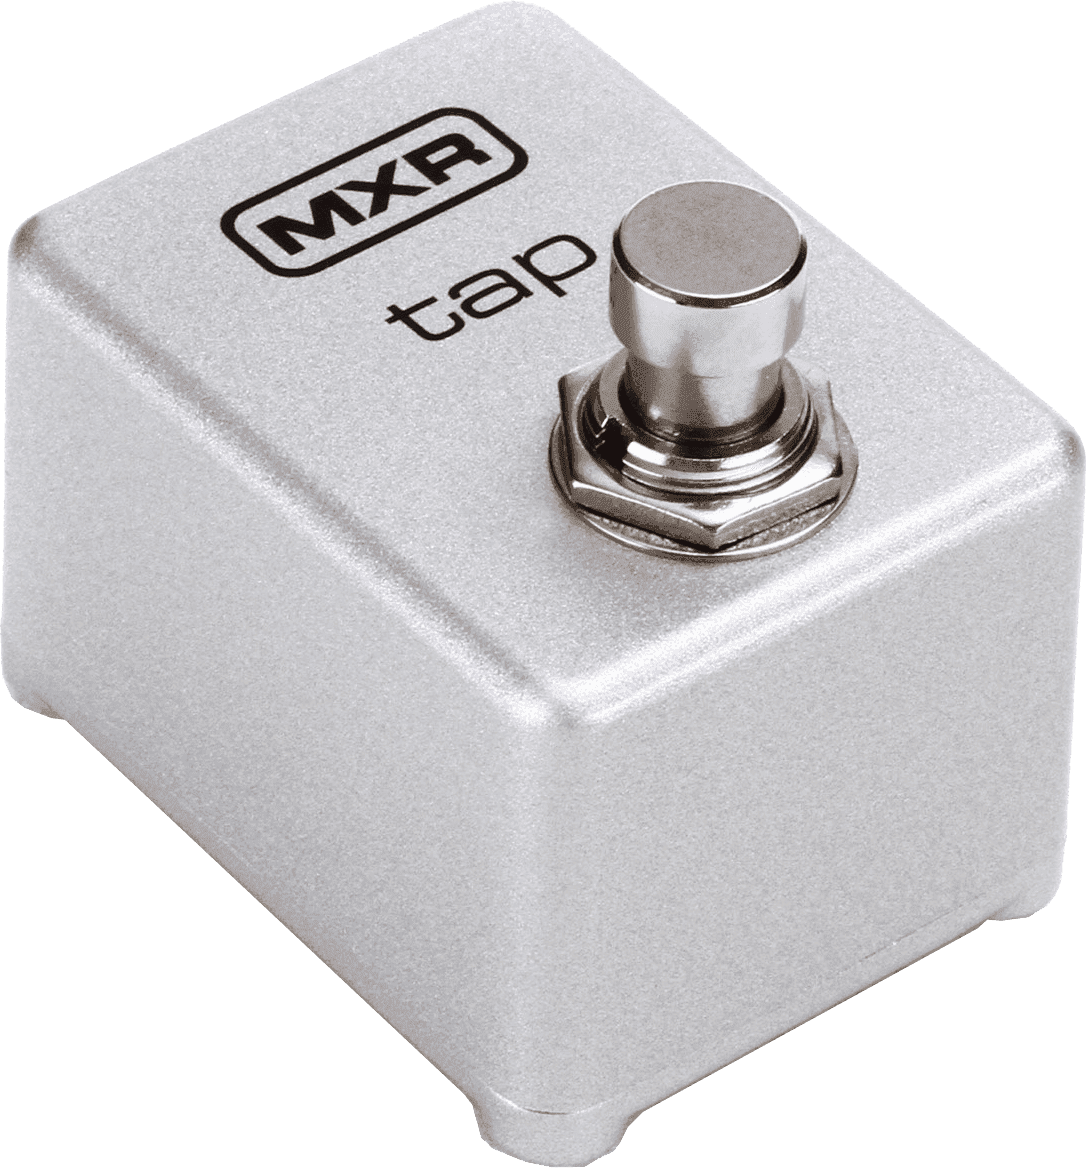 Mxr Tap Tempo Switch M199 - Footswitch & Commande Divers - Variation 2